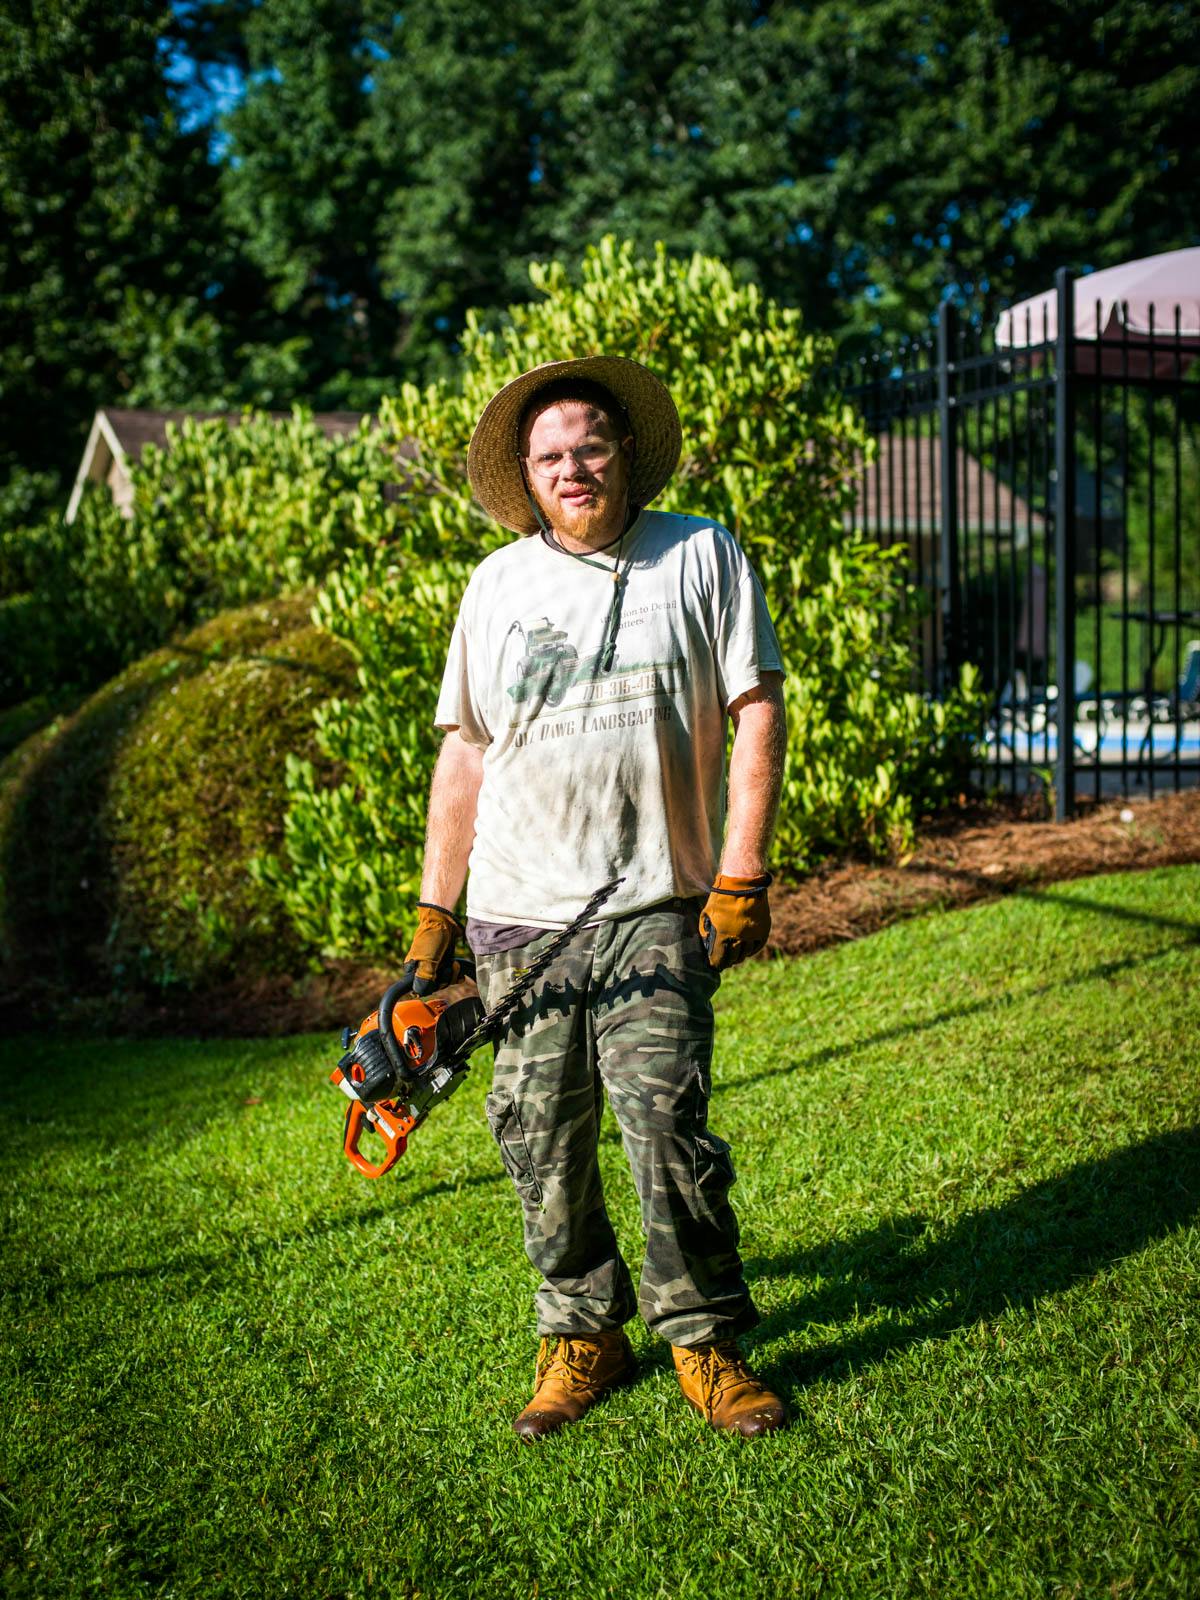 Lawn care worker holding hedge trimmer and wearing camo pants and hat, looking at the camera.